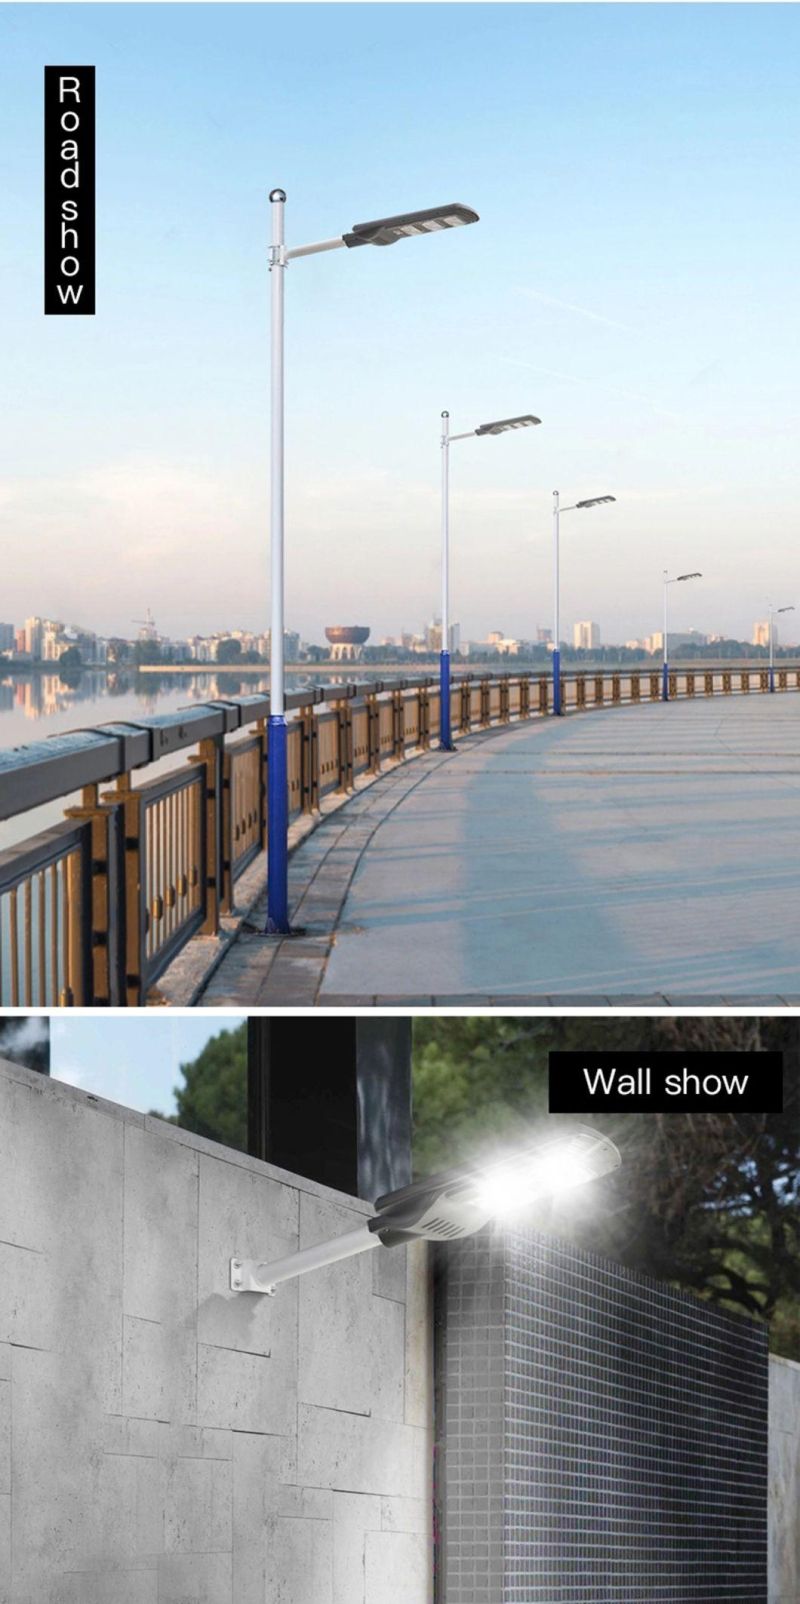 China Suppliers Factory LED Outdoor Light Waterproof IP65 Die Cast Aluminum Housing LED Street Light